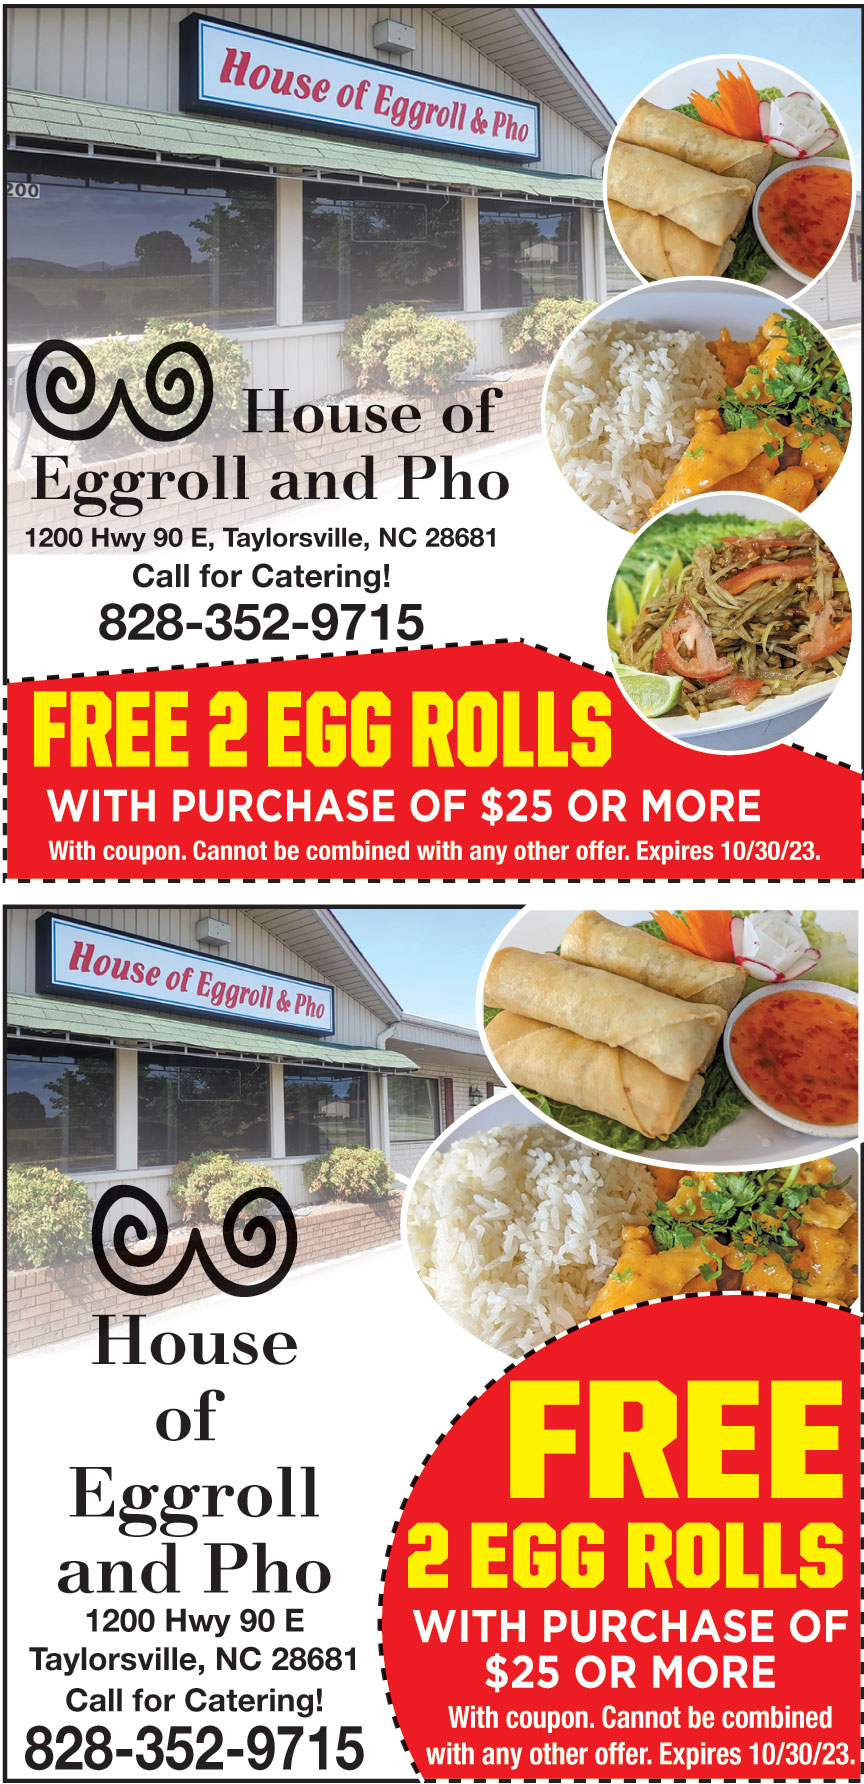 HOUSE OF EGGROLL AND PHO